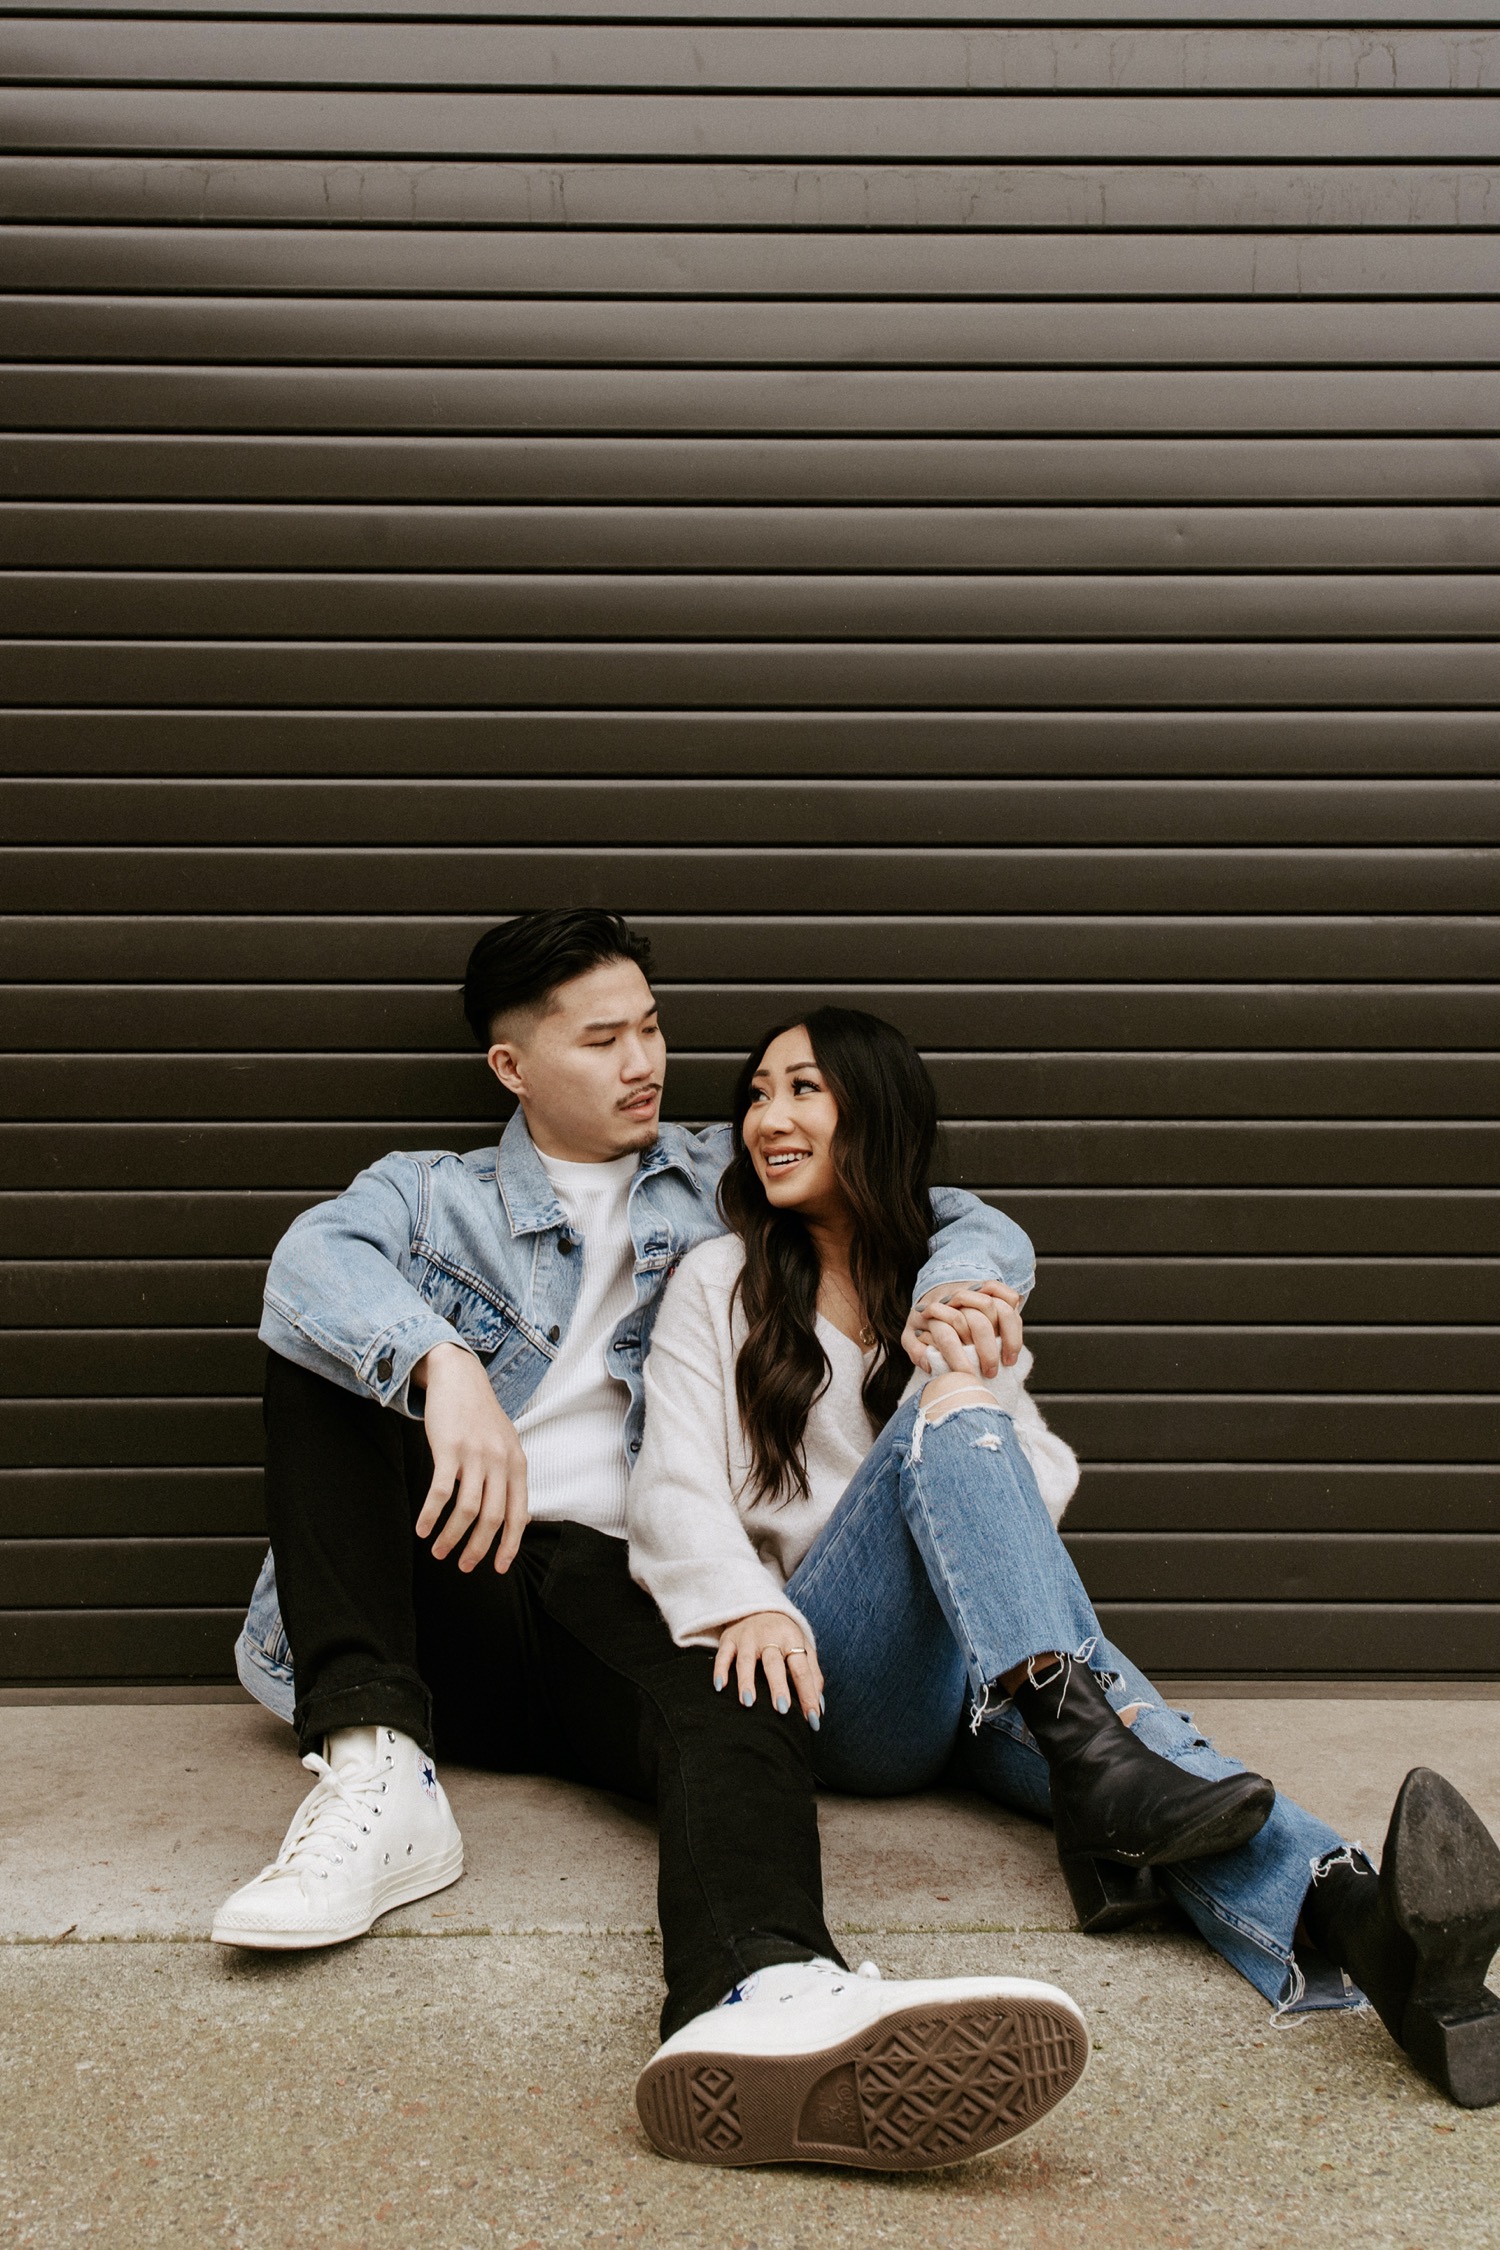 Go-To Engagement Photoshoot Poses | AGS Photo Art